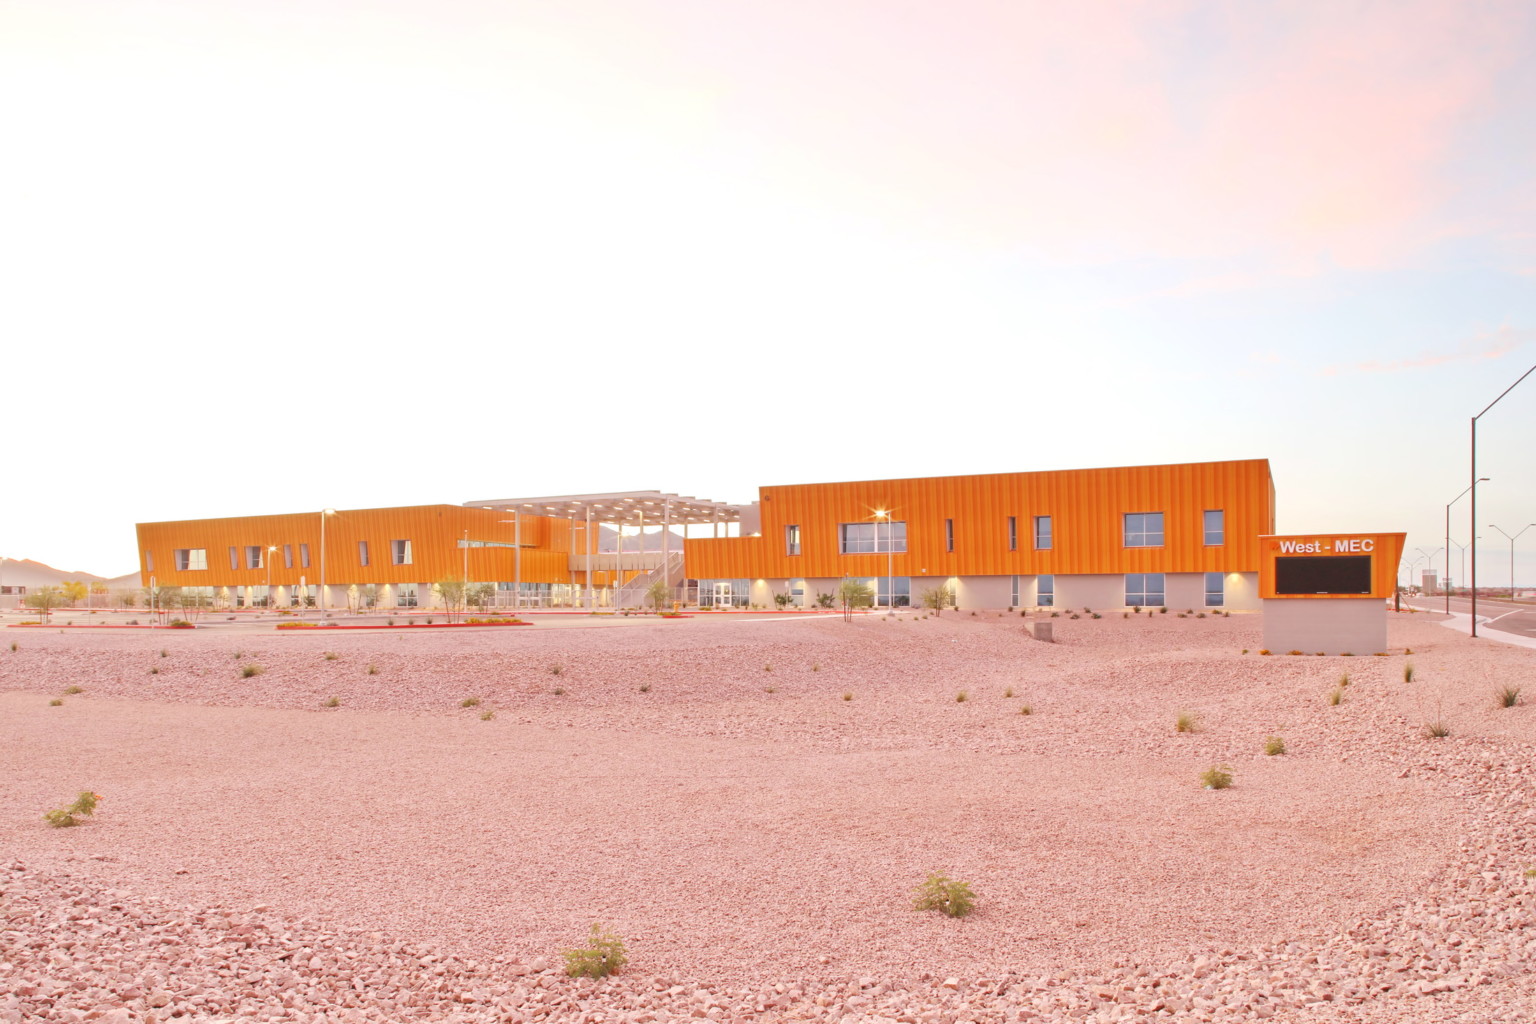 exterior view of a long orange building, designed to be net positive in energy creation in Arizona